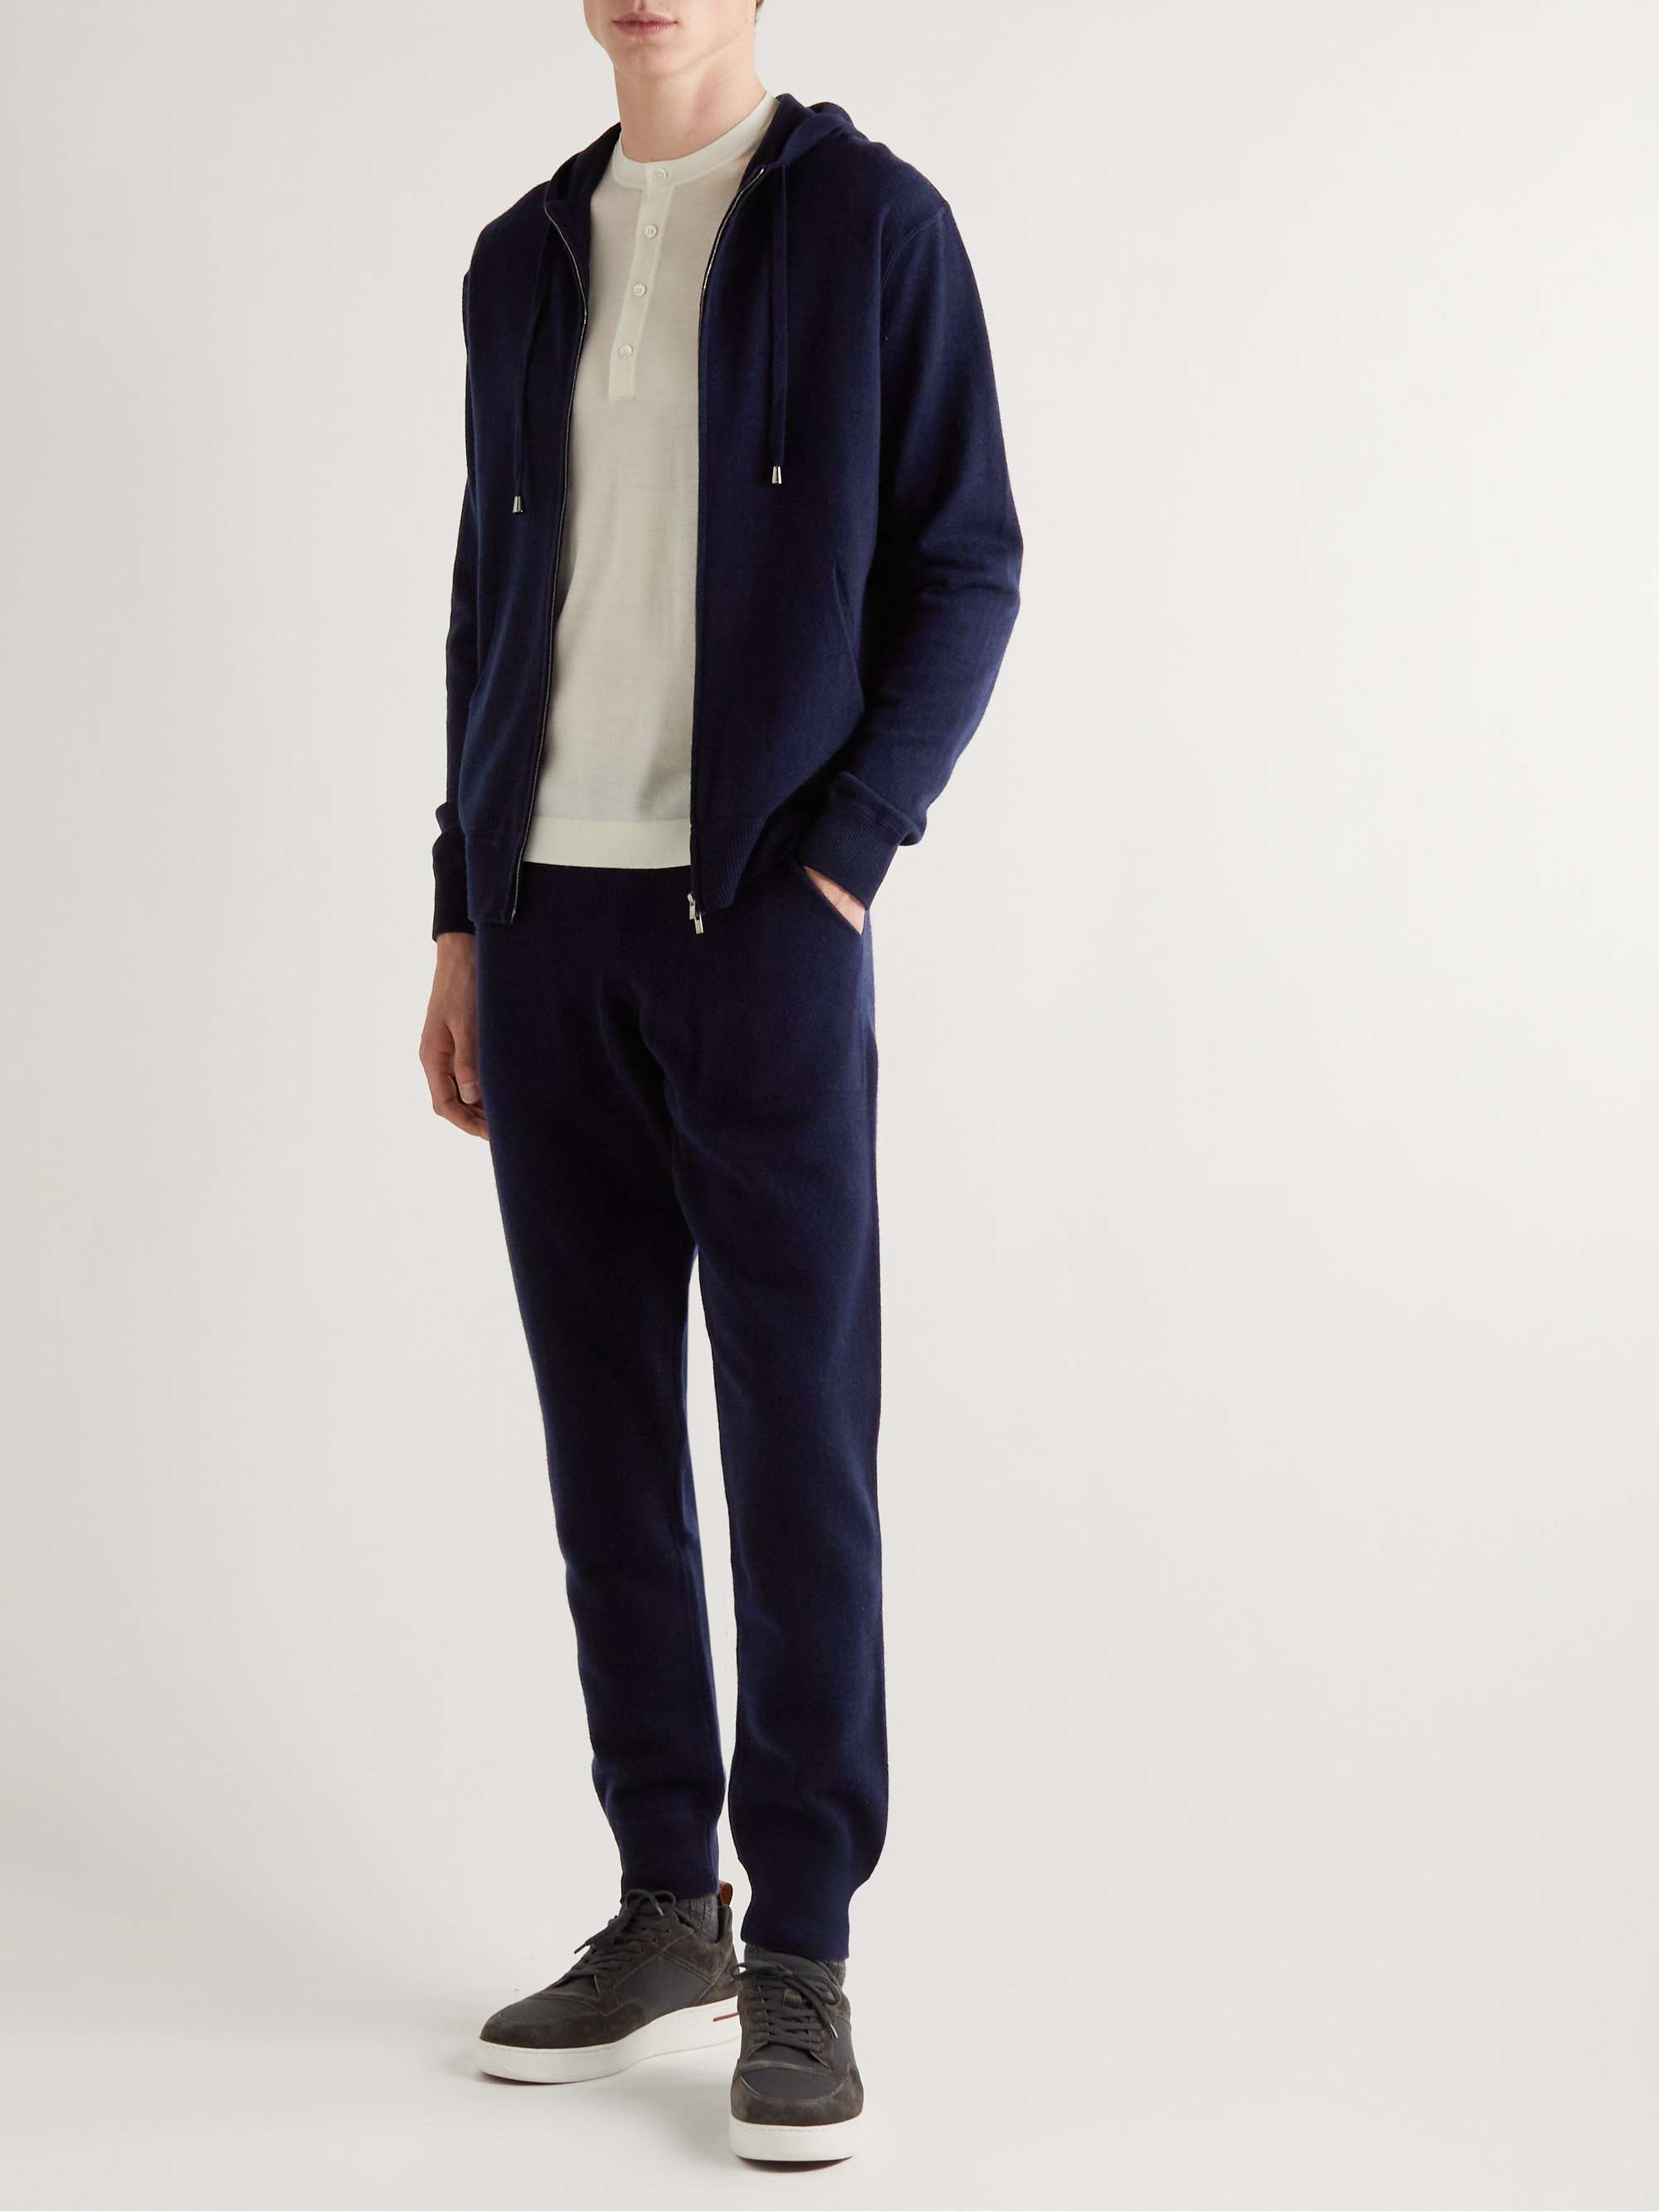 THOM SWEENEY Tapered Wool and Cashmere-Blend Sweatpants